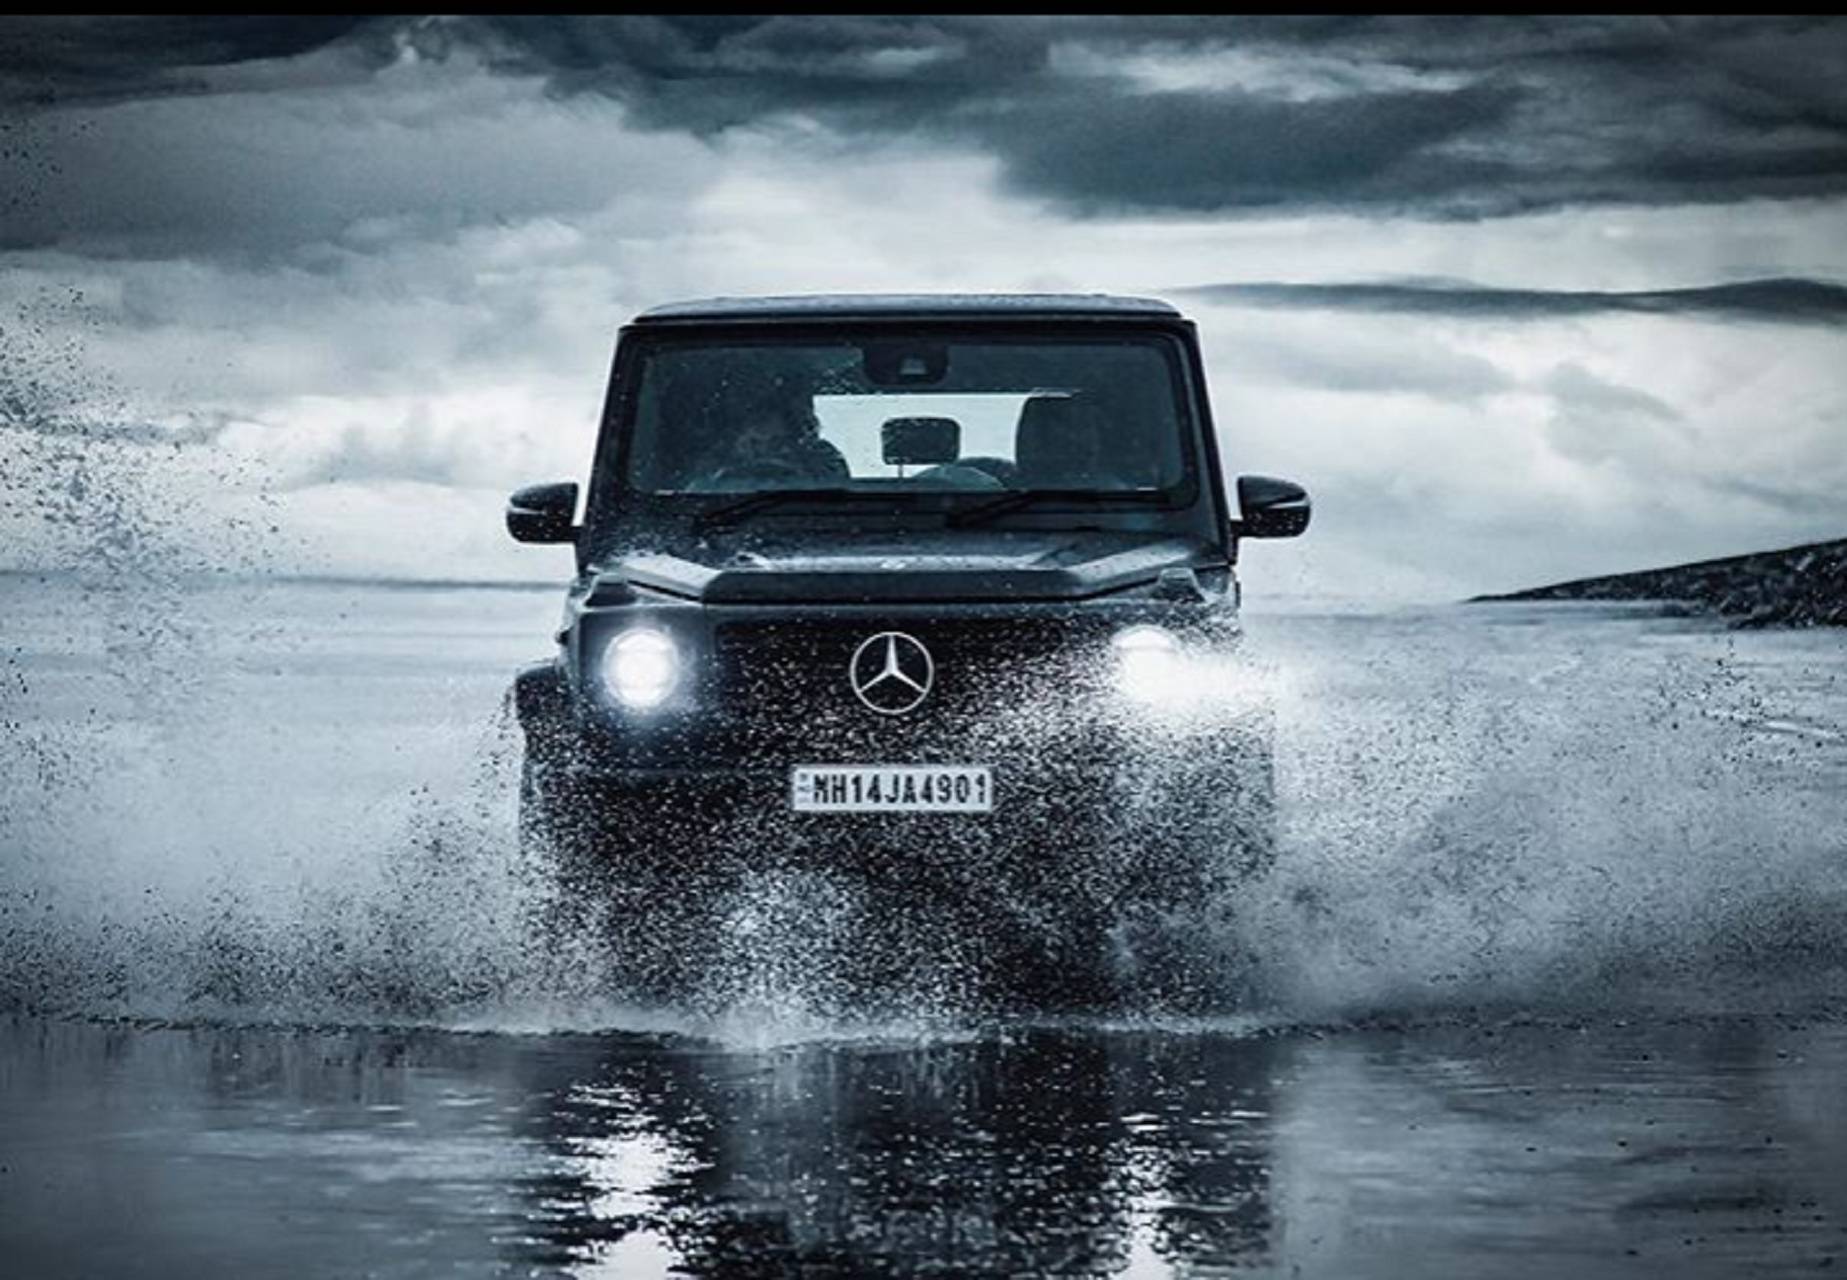 Download MERCEDES G WAGON Wallpaper HD by Anothersoul2005901. Wallpaper -HD.Com